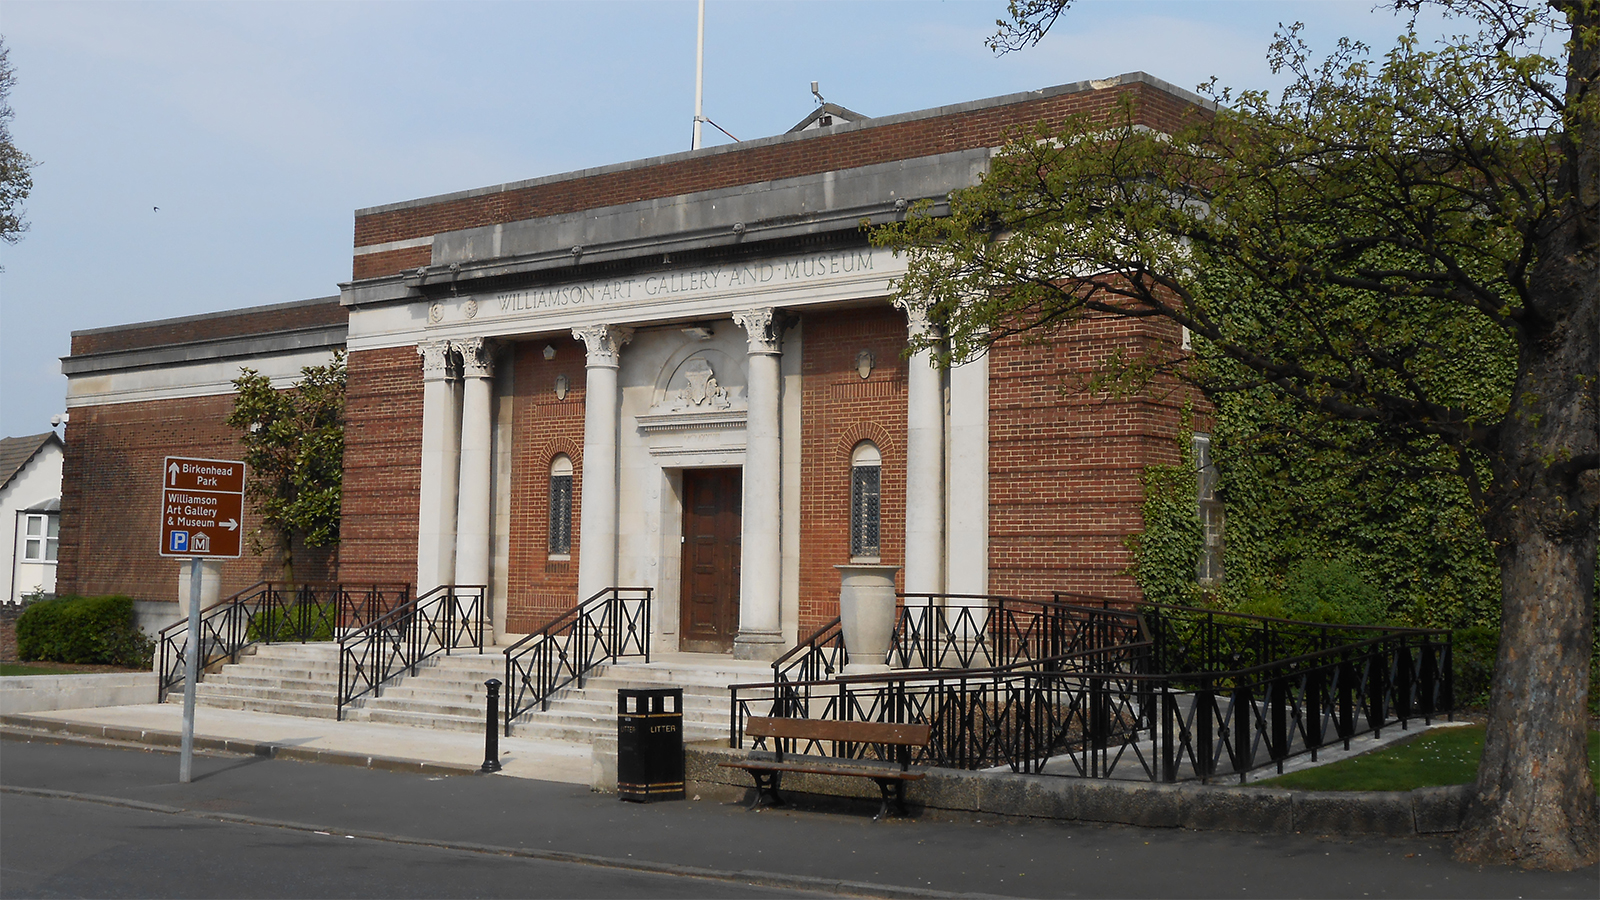 Williamson Art Gallery and Museum in Birkenhead is at risk of closure